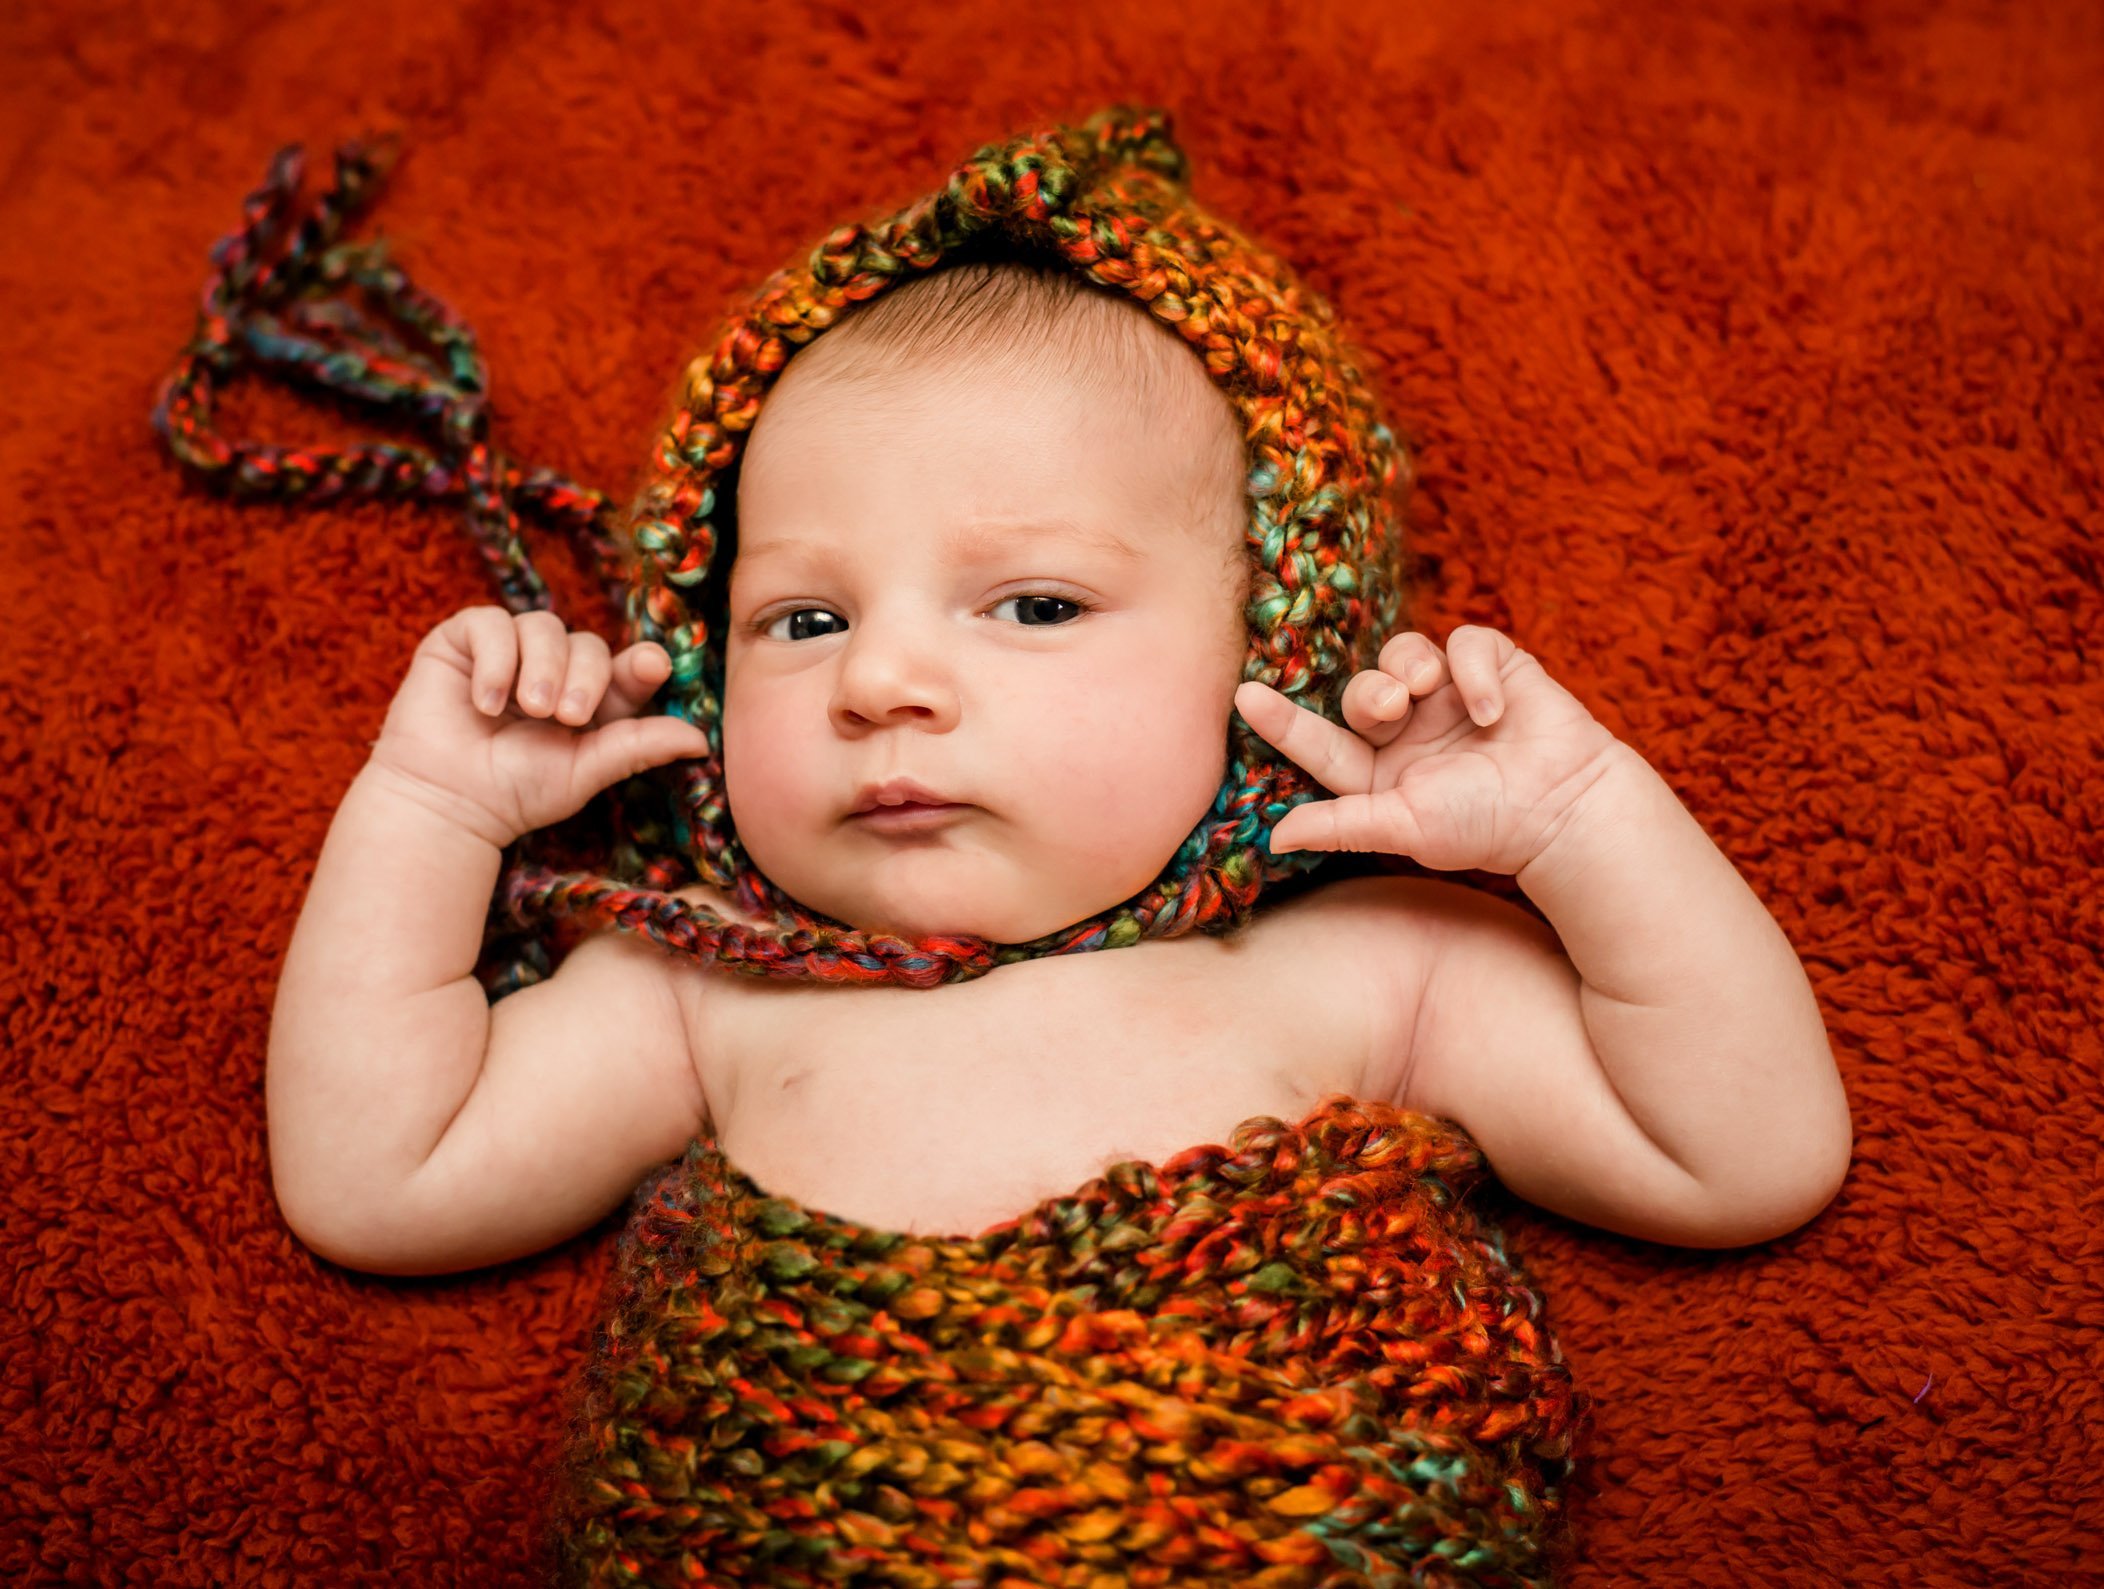 newborn wearing a fall-colored bonnet and wrap on red blanket awake